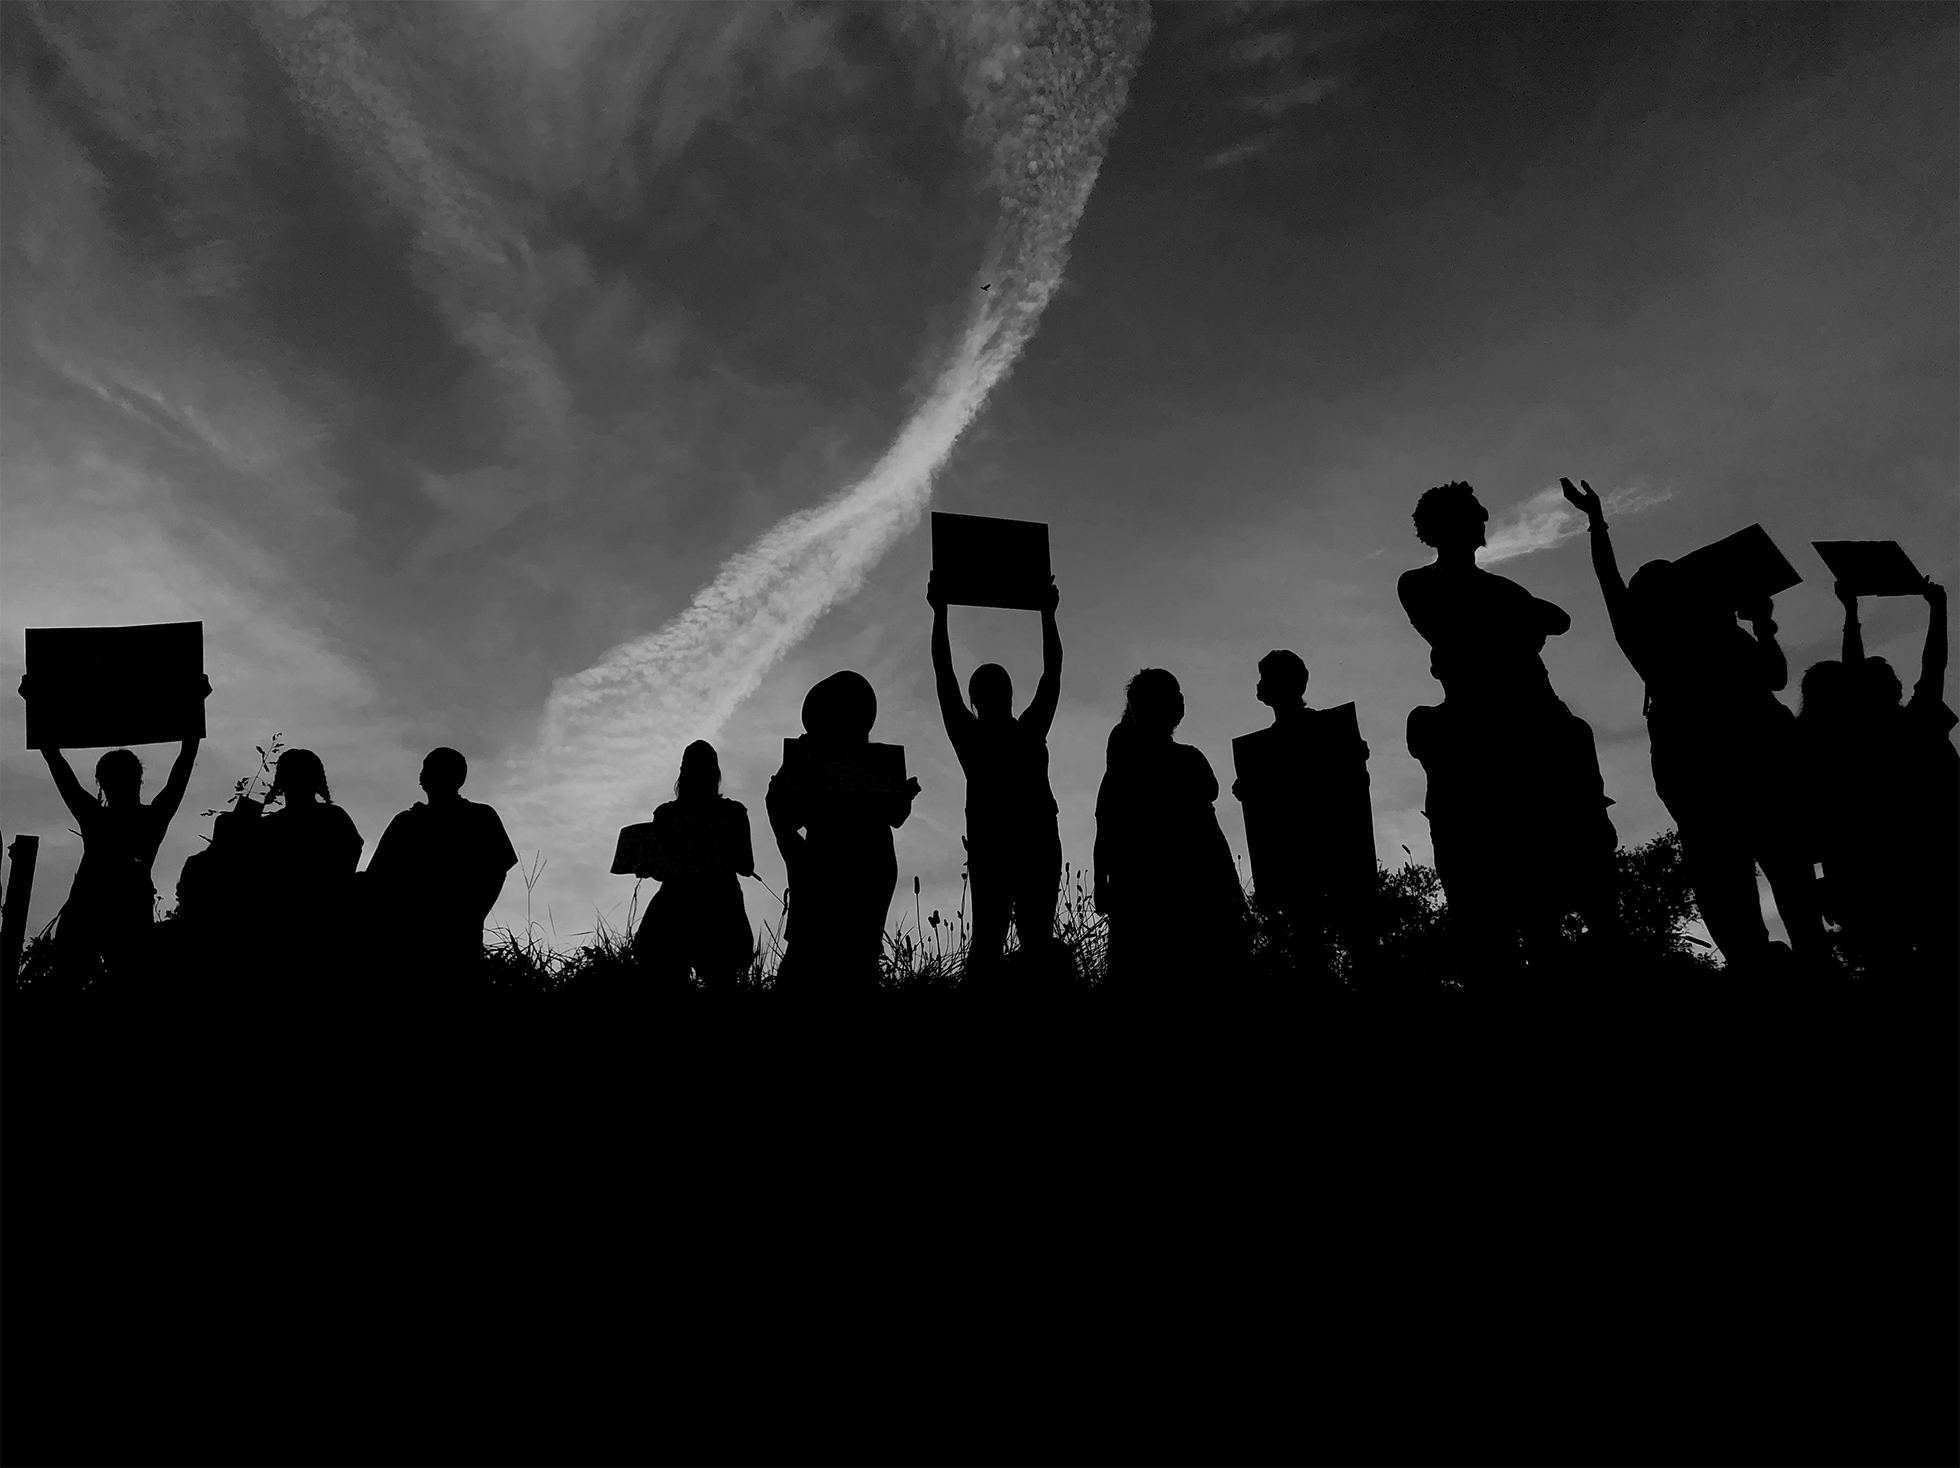 A silhouette of protestors against the sky.